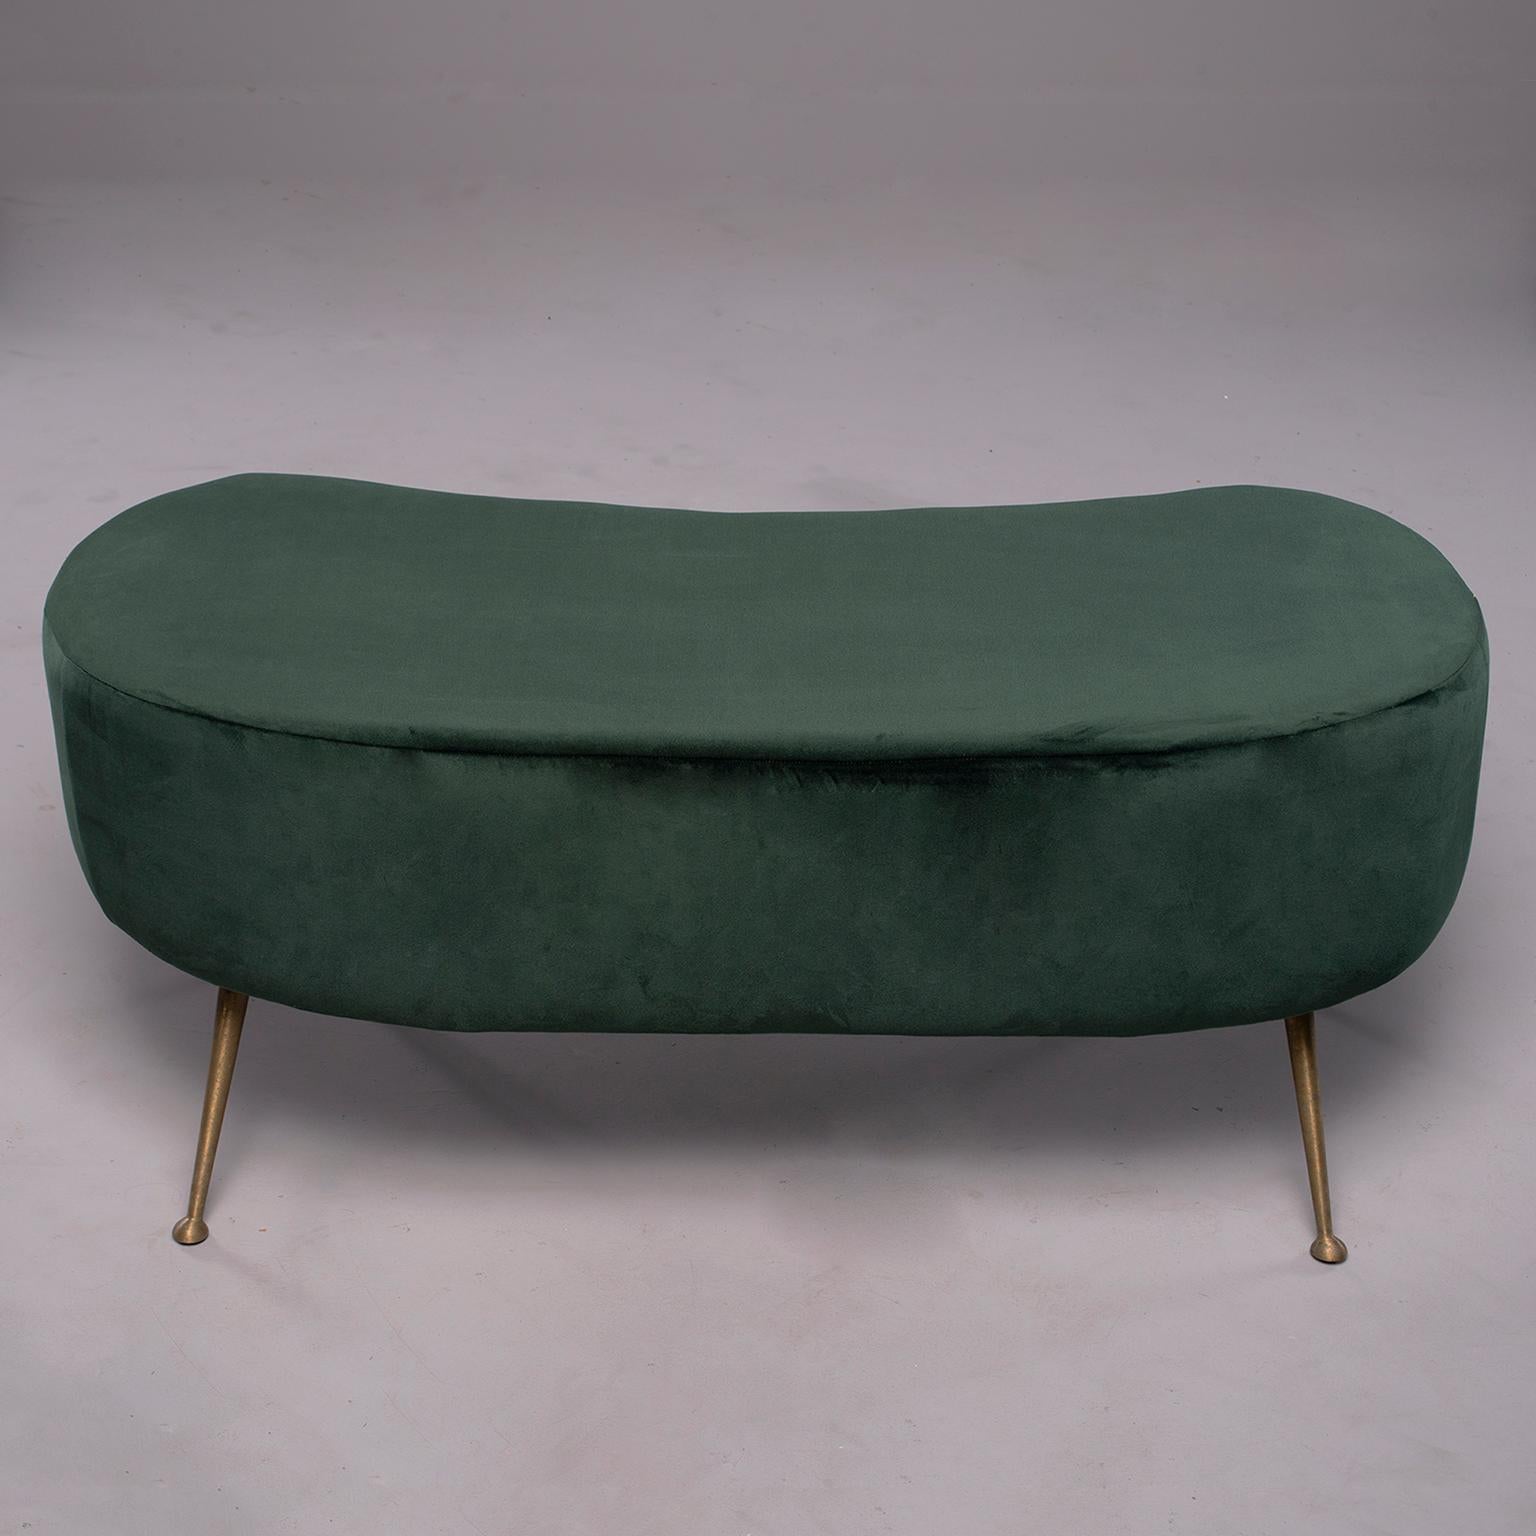 Italian upholstered bench is kidney shaped with narrow, gold metal legs and feet, circa 1960s. Fabric has been recently replaced and is an emerald green short-napped synthetic velvet. Two stools are available at the time of this posting. Sold and